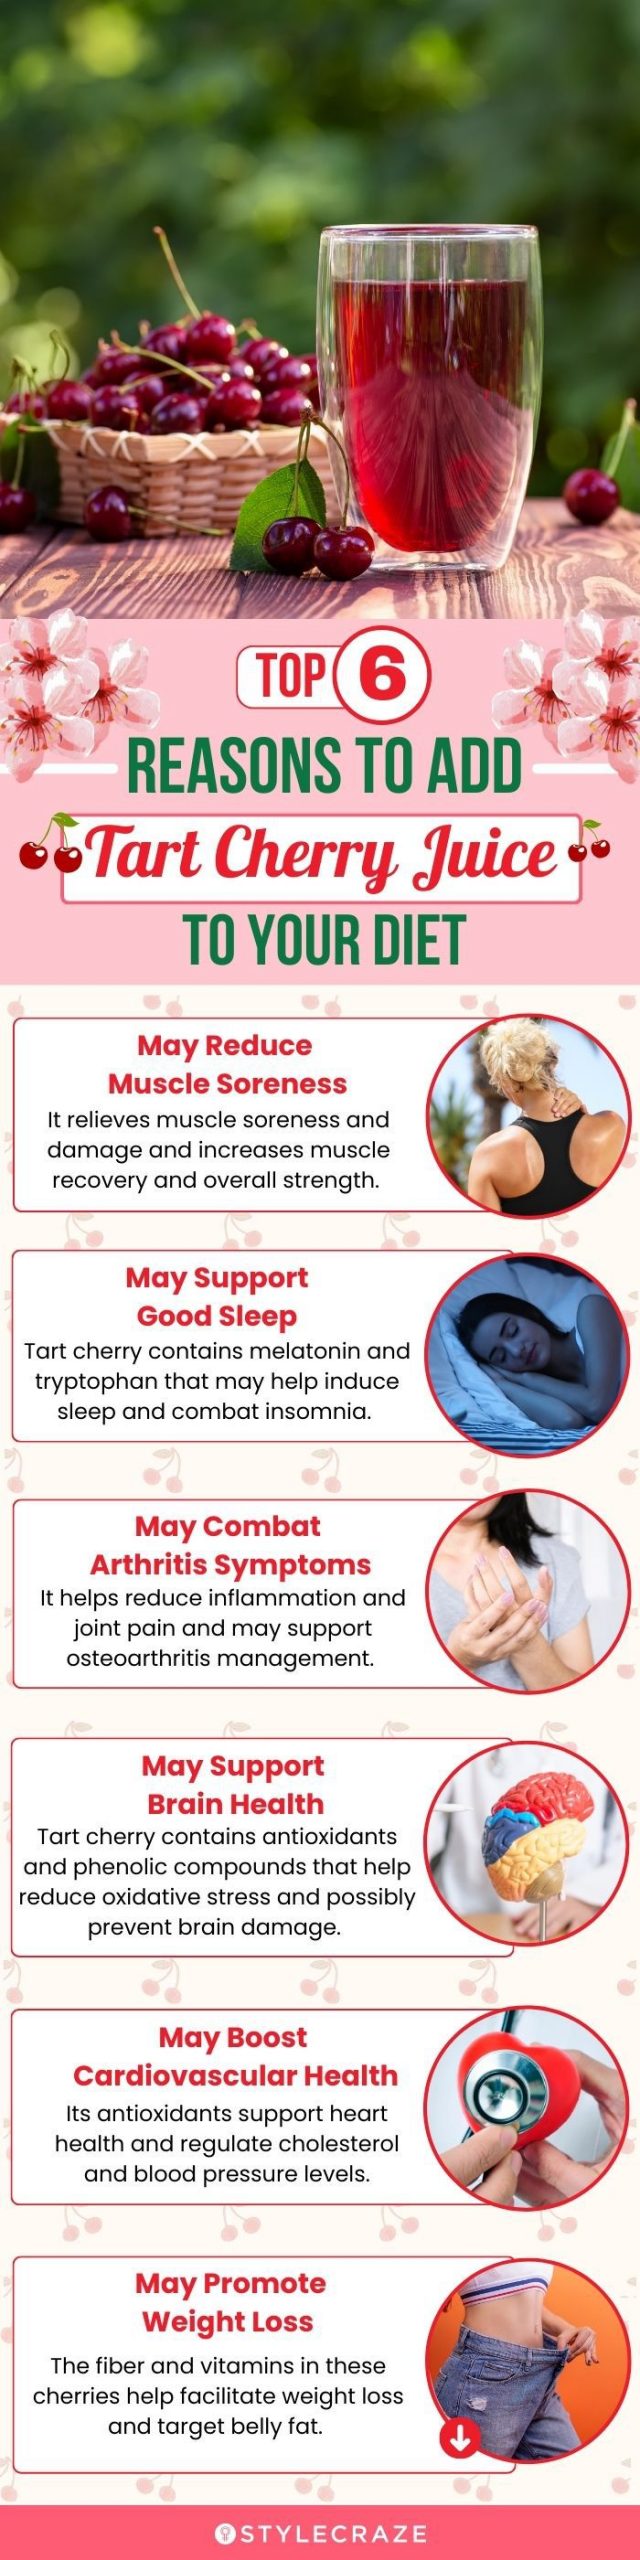 top 6 reasons to add tart cherry juice to your diet (infographic)